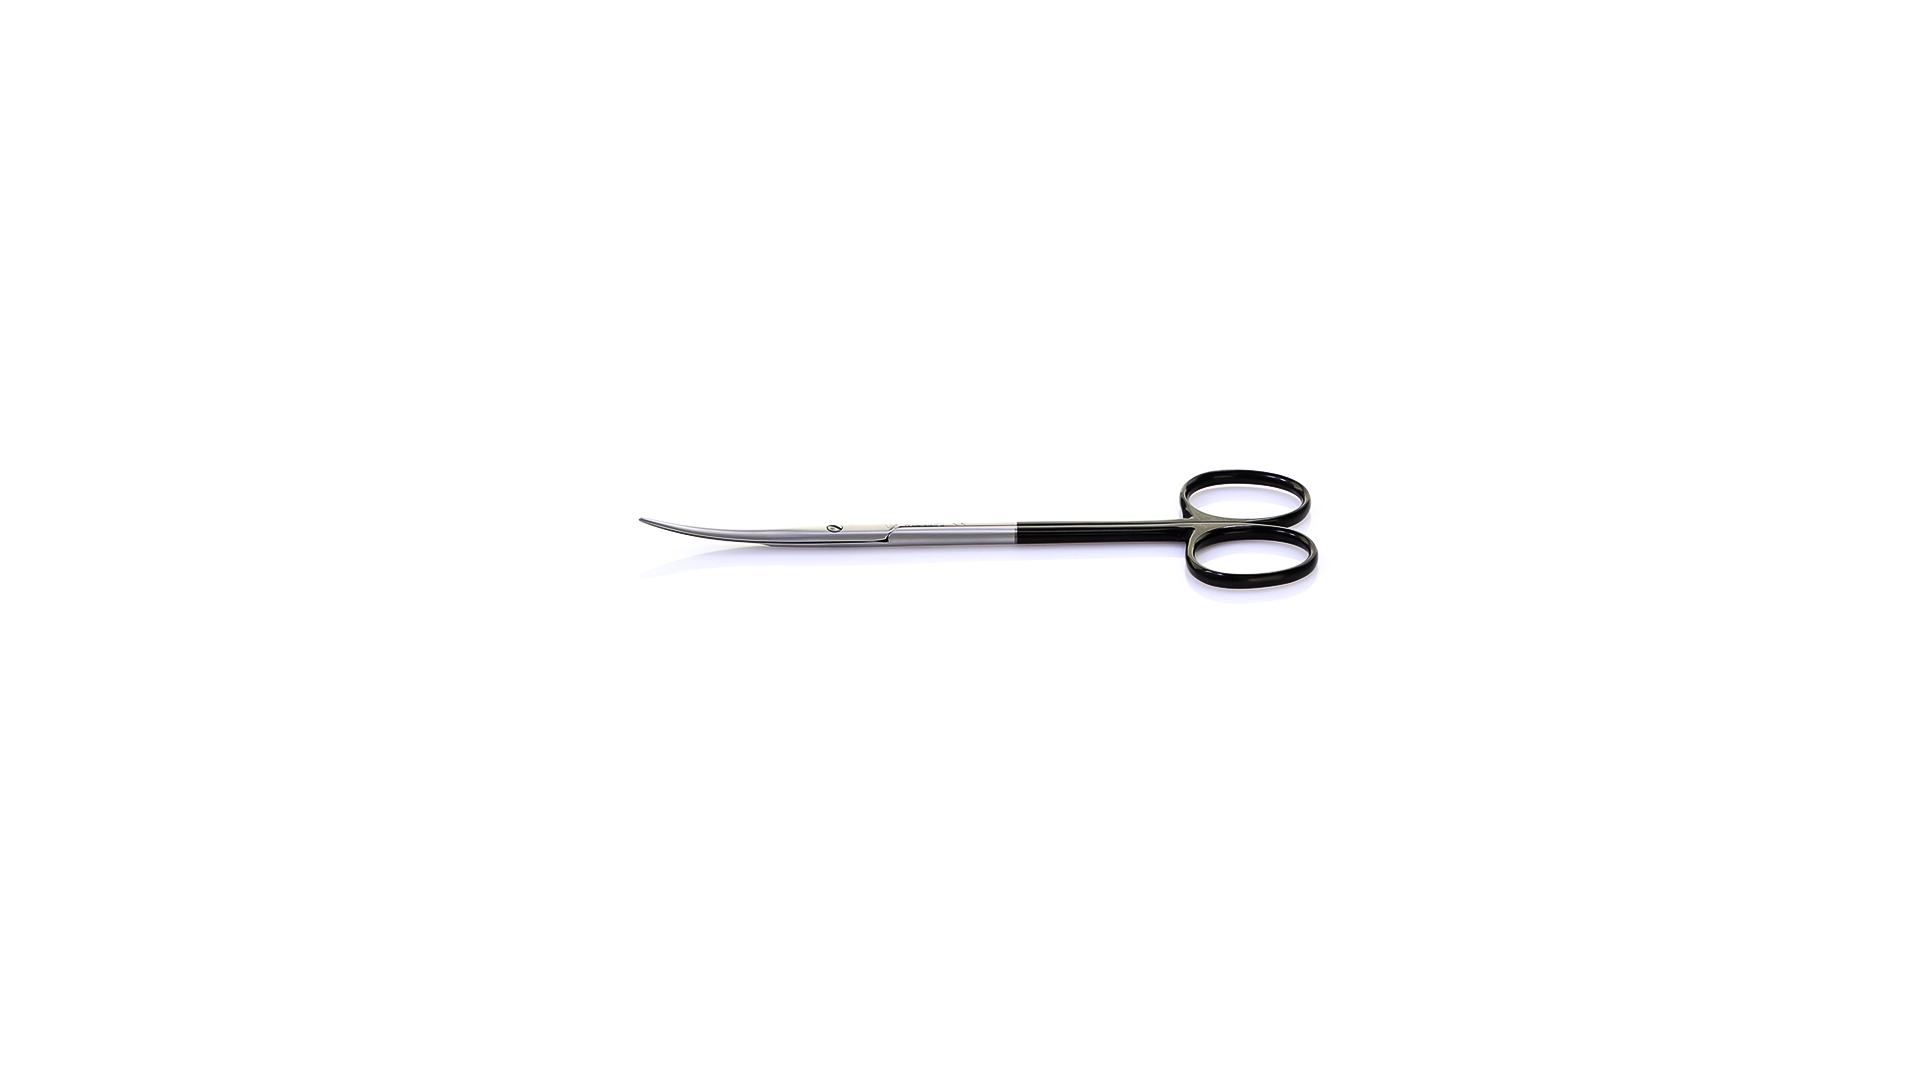 Scissors, Surgical, Sharp/Blunt Points, Curved Blades, 6.5